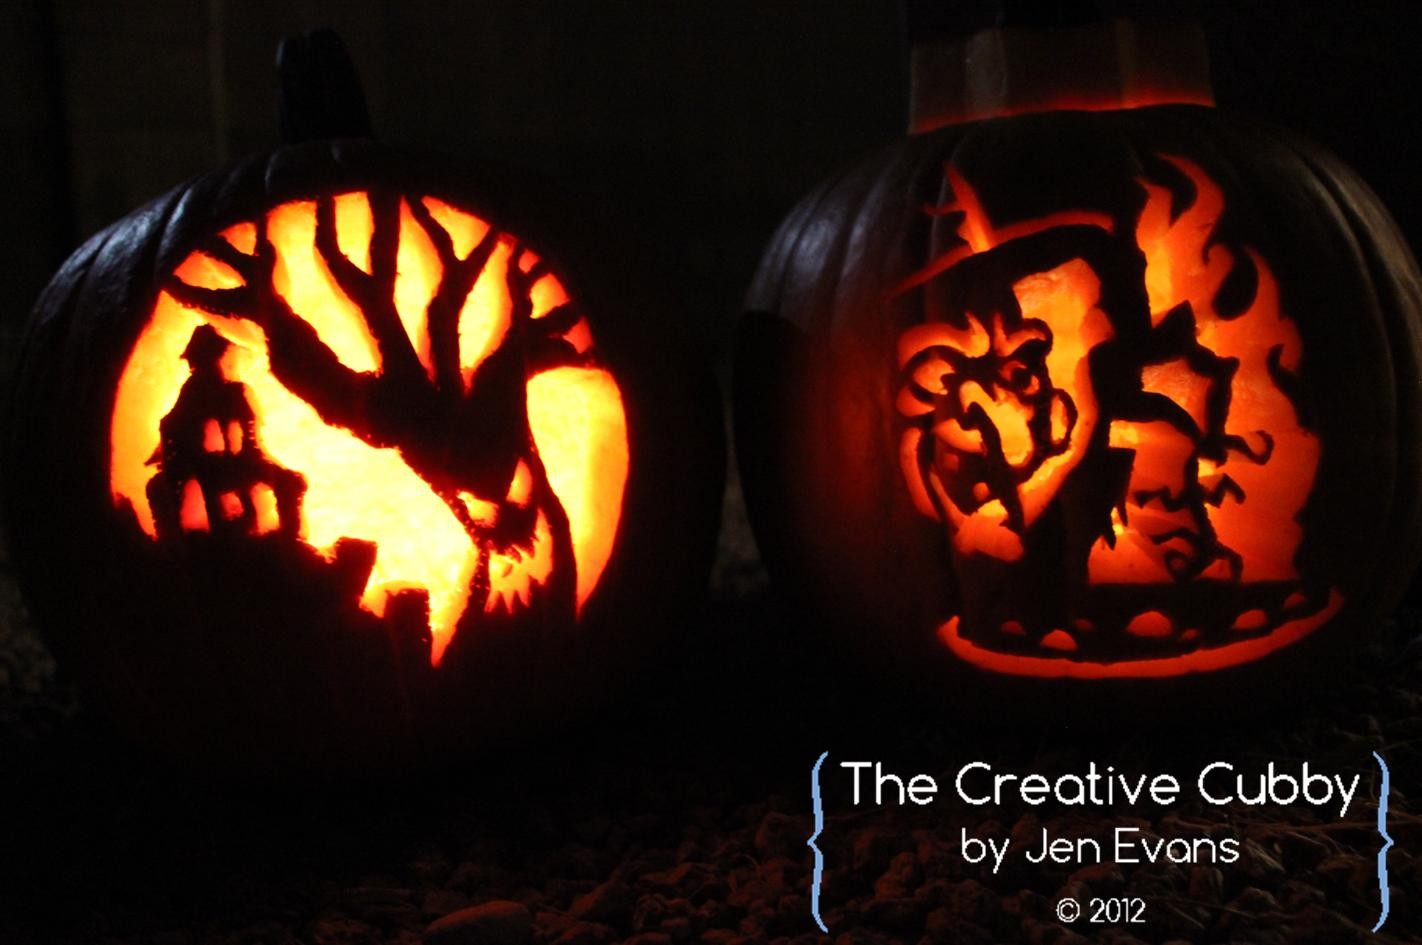 The Creative Cubby Evans Pumpkin Carving 2012 Free